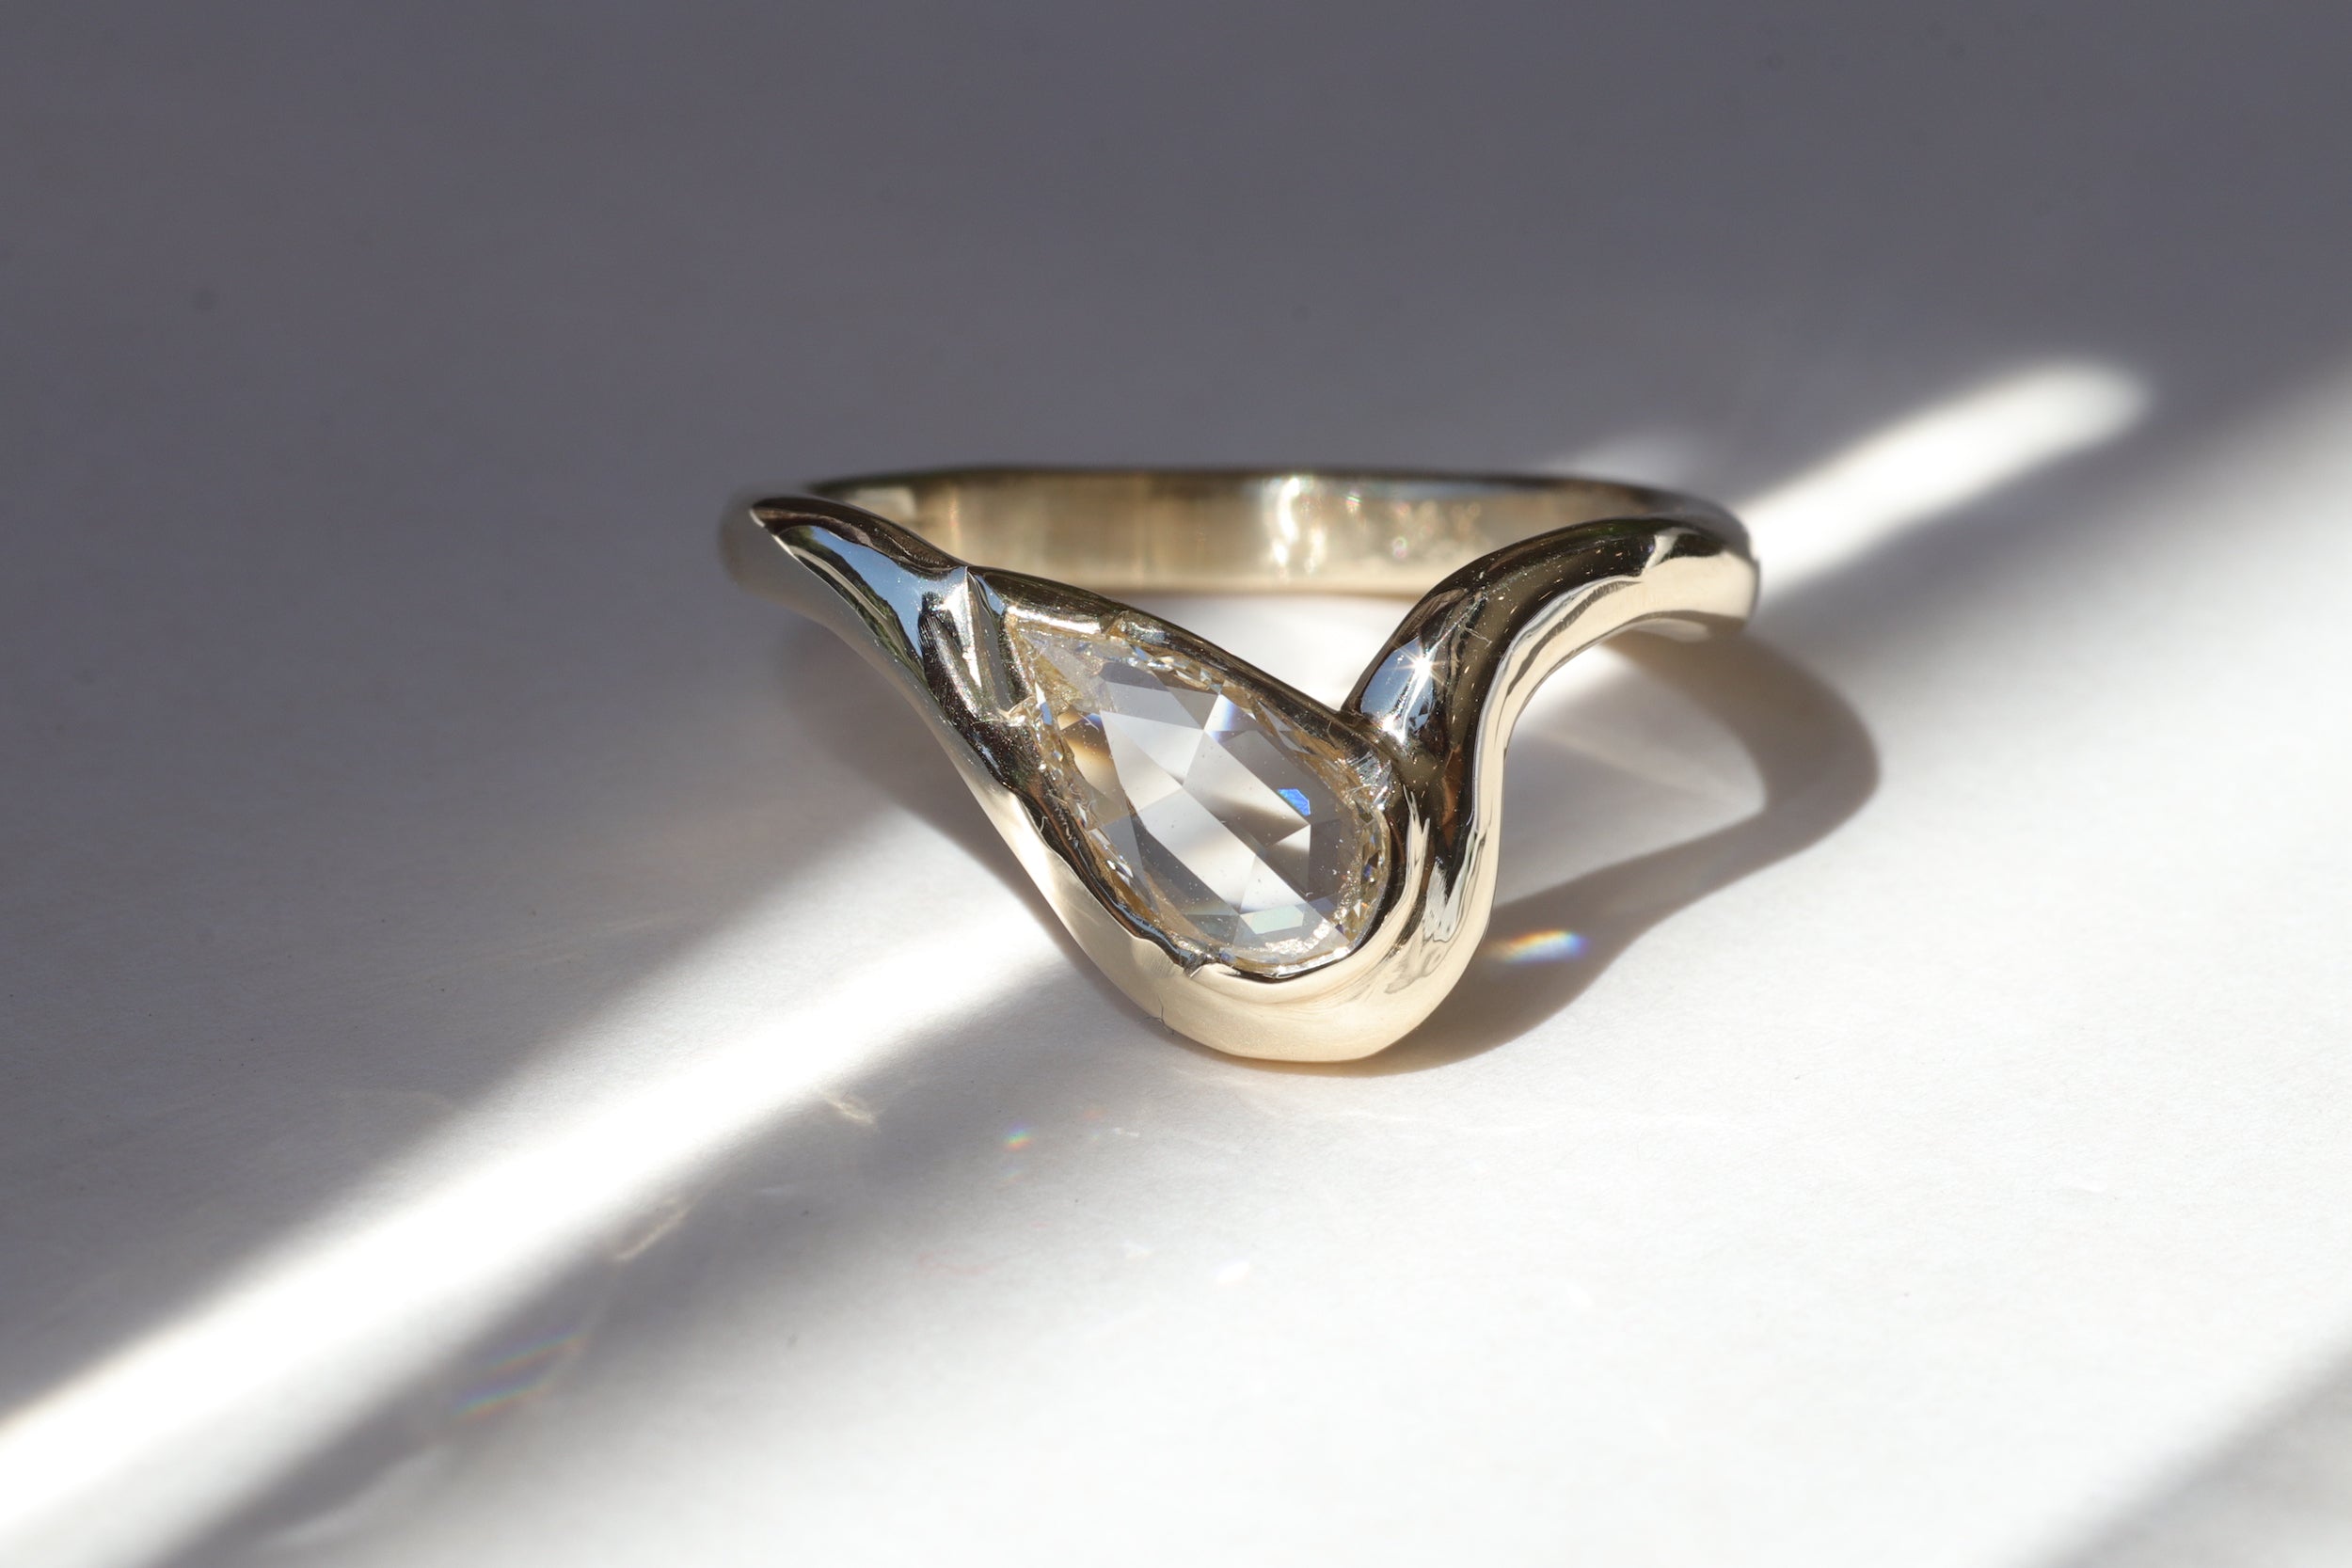 Pear Dip Ring By Kestrel Dillon in Engagement Rings Category